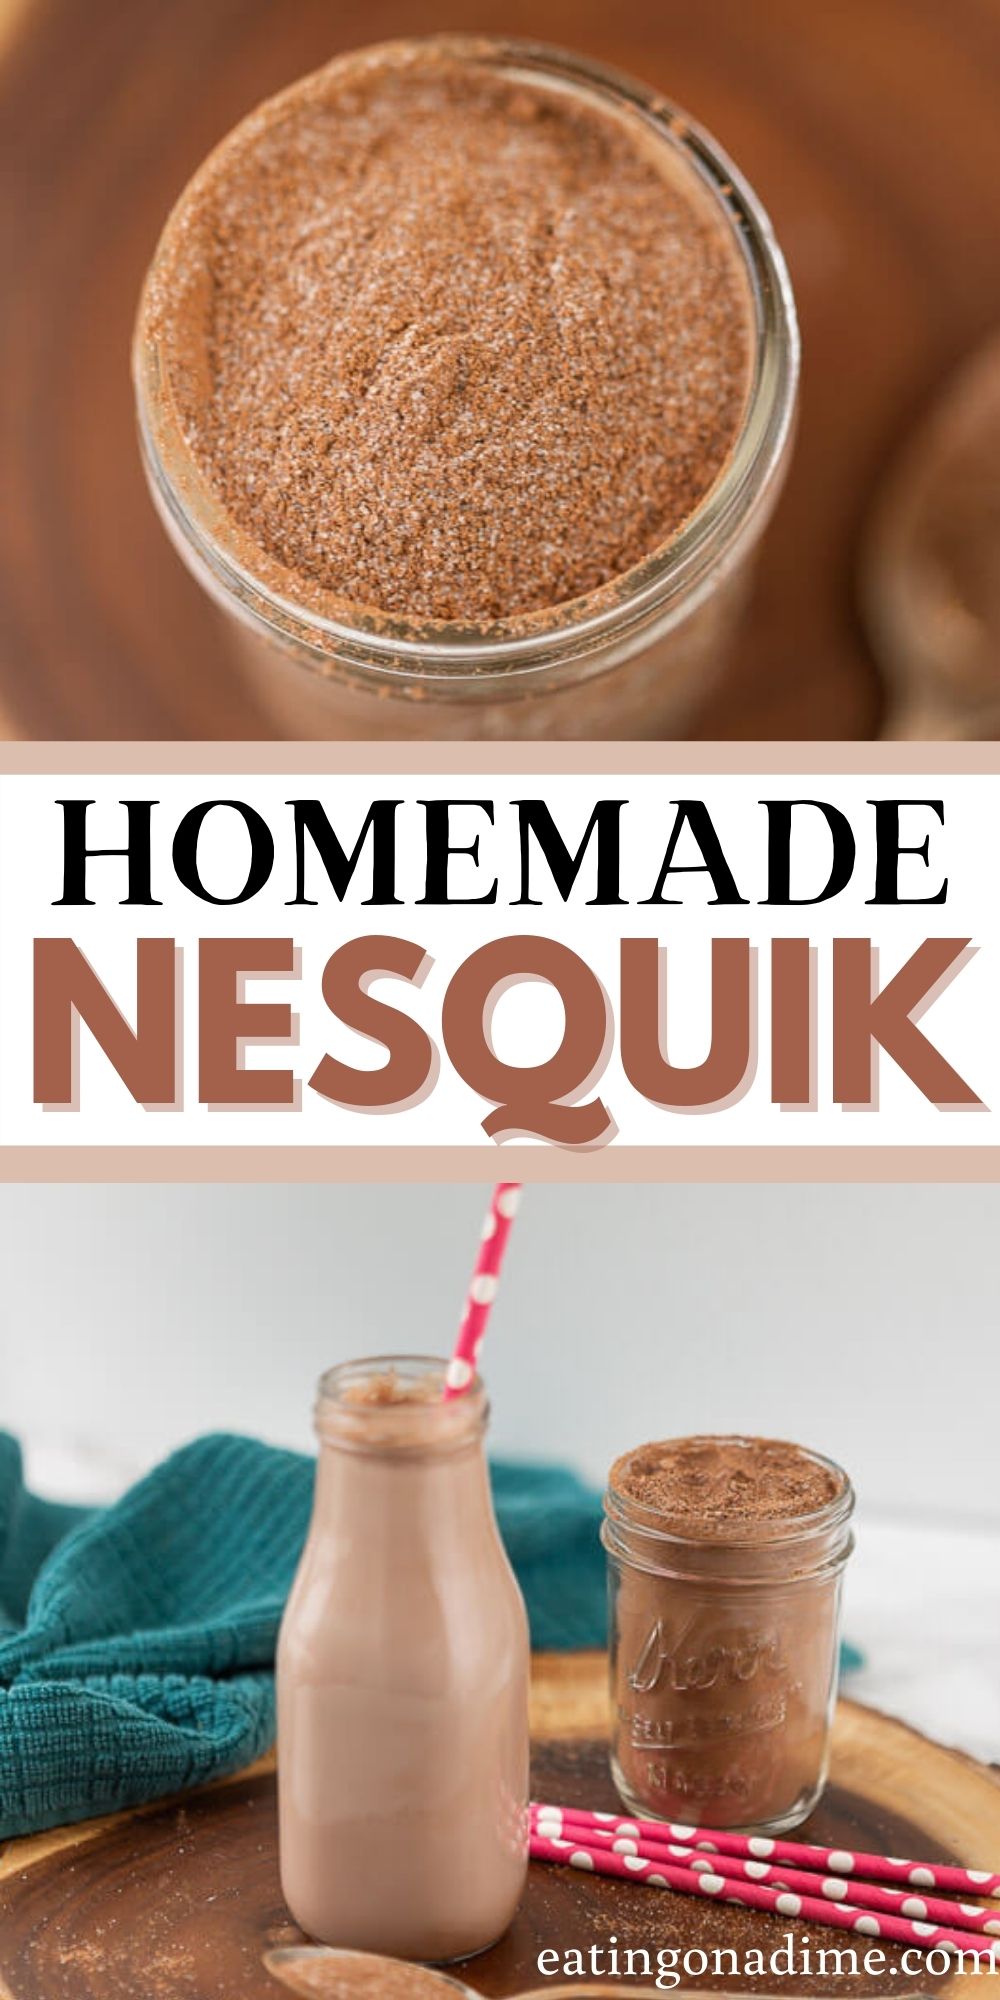 Save money by making your own homemade Nesquik. It is easy to make and healthier by making your own DIY Nesquik powder at home.  Learn how to make this easy copycat Nesquik recipe.  #eatingonadime #nesquikrecipes #copycatrecipes #easyrecipes 